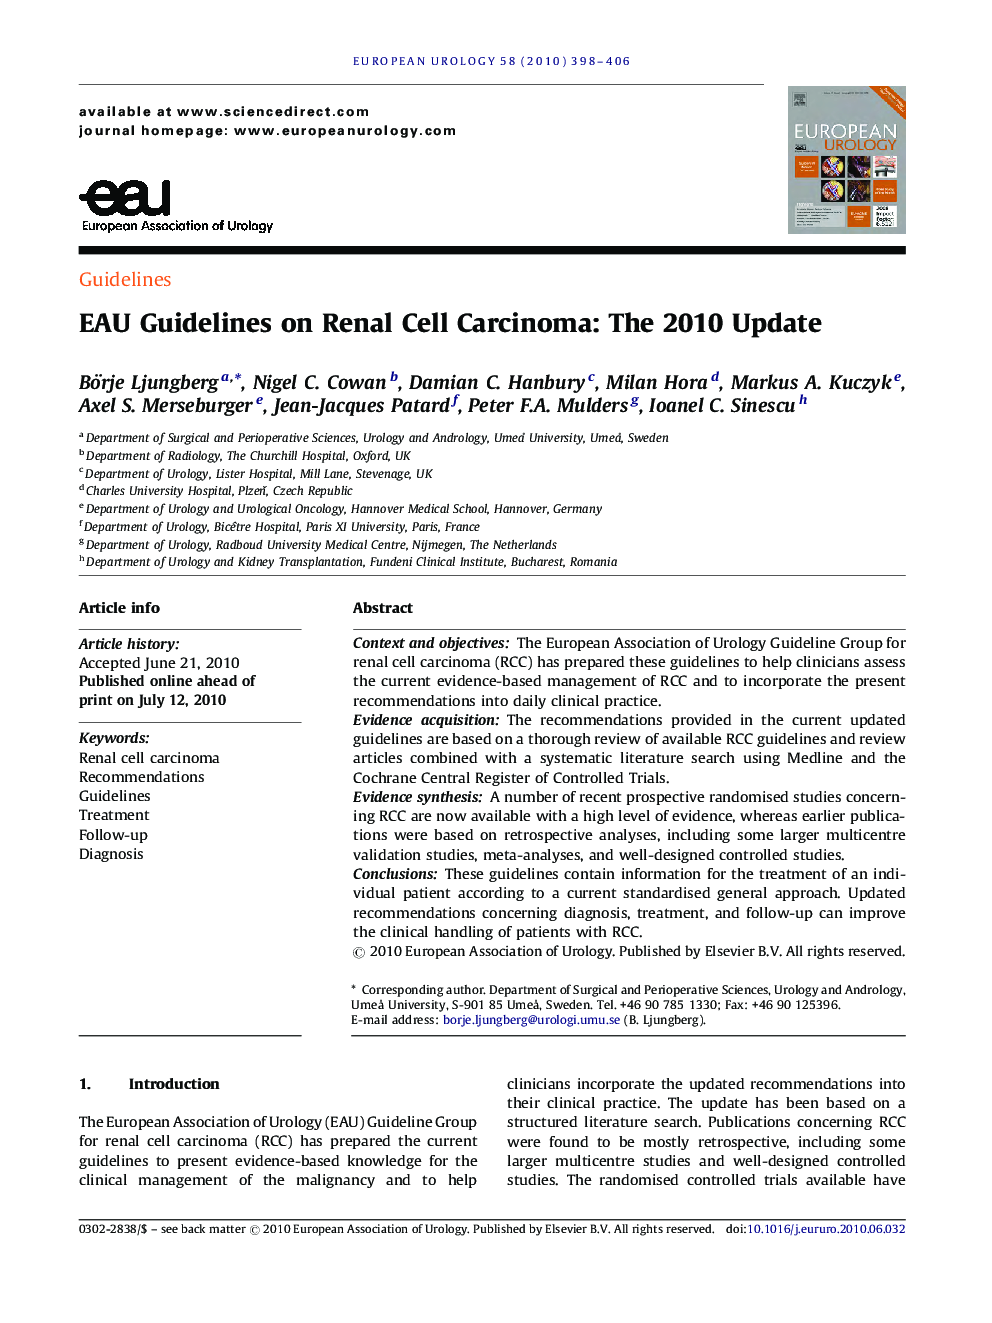 EAU Guidelines on Renal Cell Carcinoma: The 2010 Update